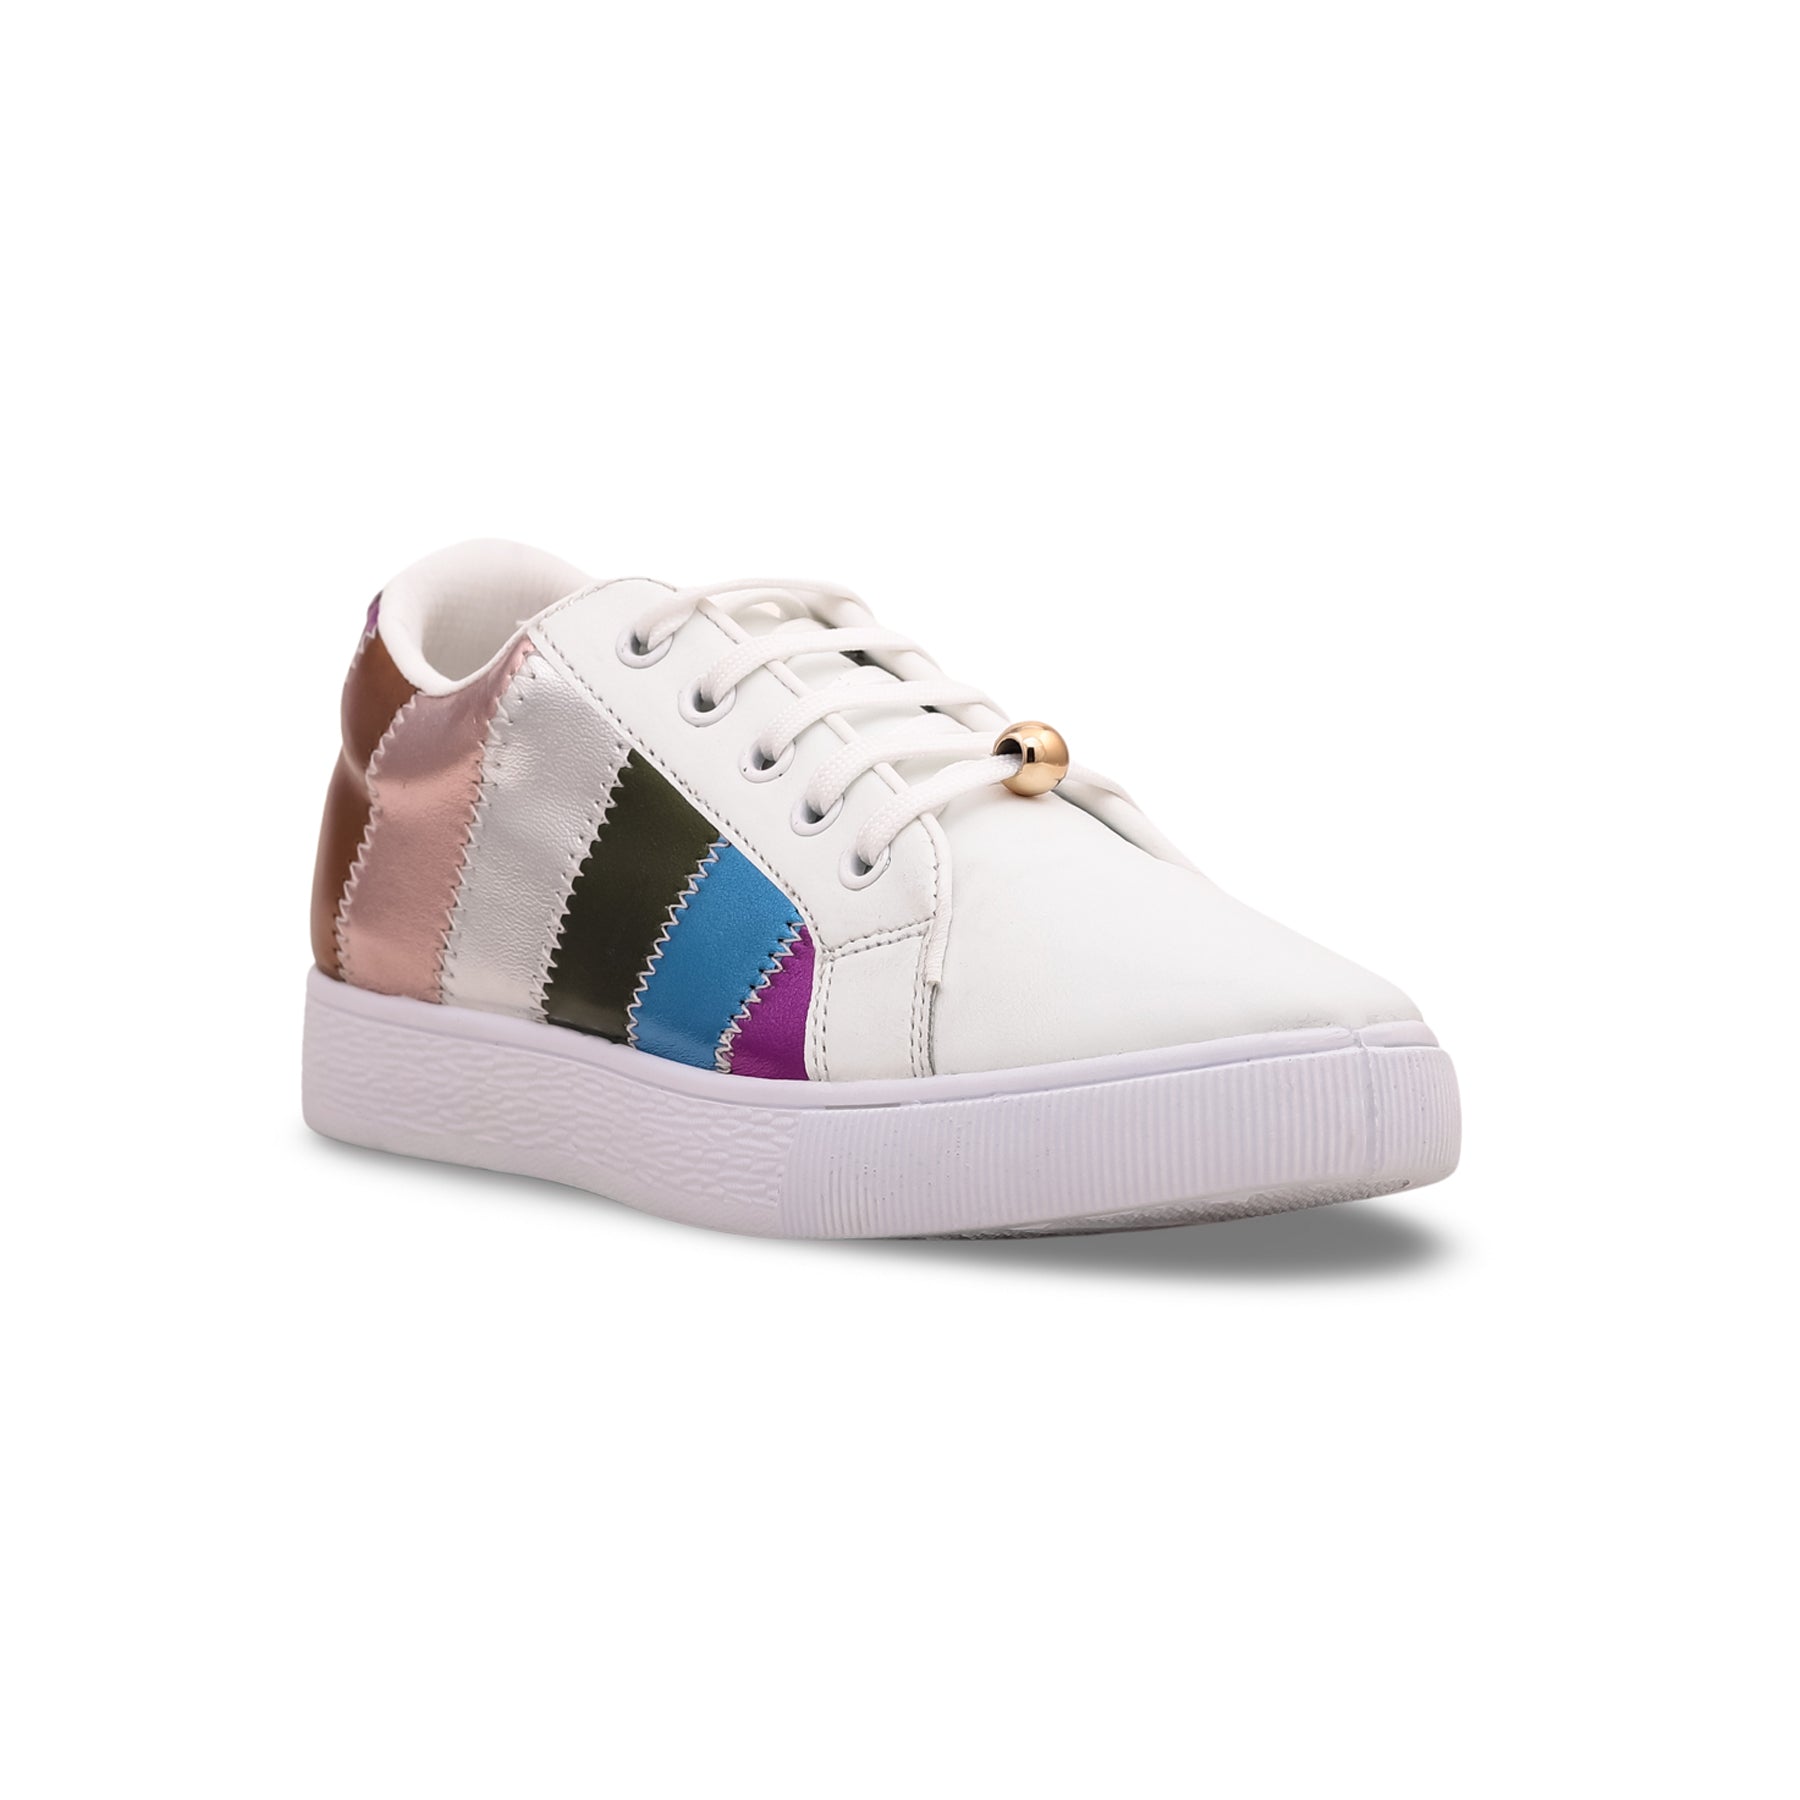 White Casual Sneaker AT7274